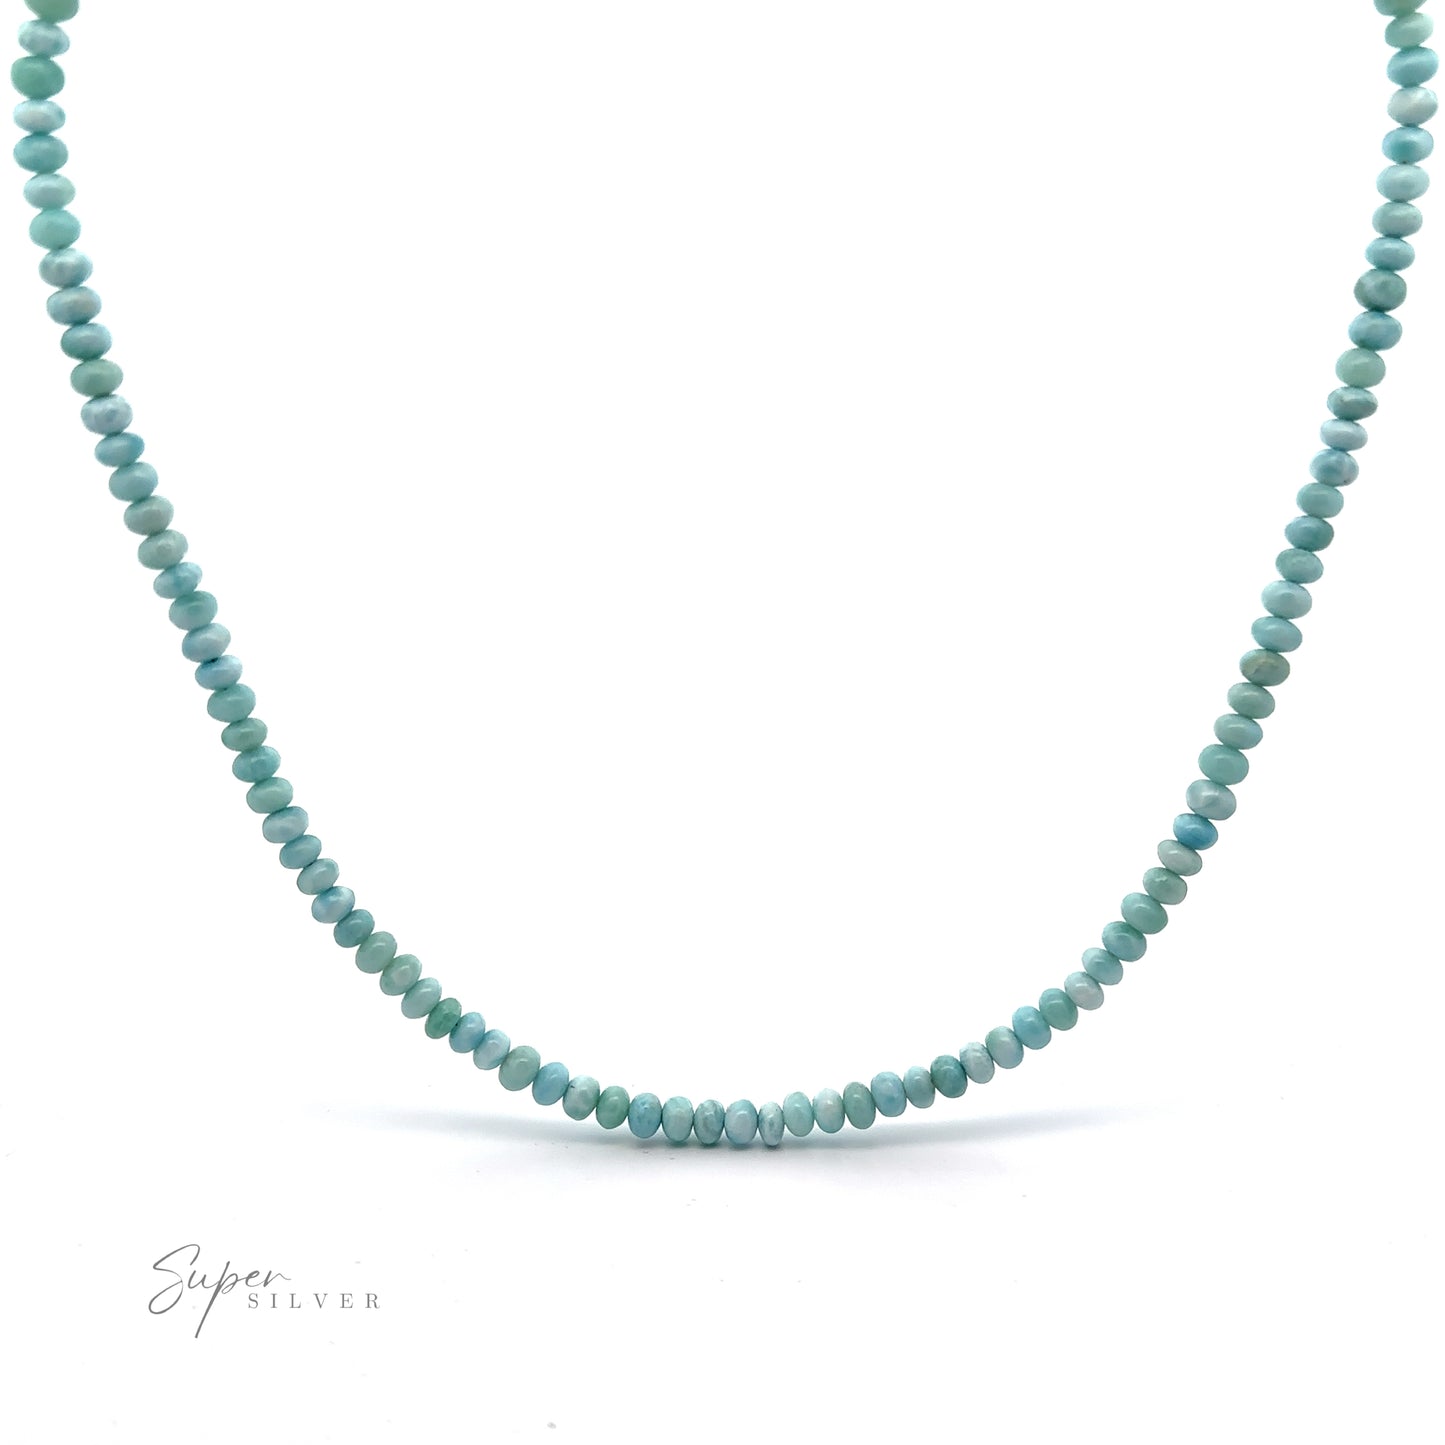 
                  
                    A turquoise beaded necklace with small, evenly-sized beads arranged in a single strand, displayed against a plain white background. The words "Super Silver" are written in the lower left corner, highlighting this exquisite Larimar Beaded Necklace.

                  
                